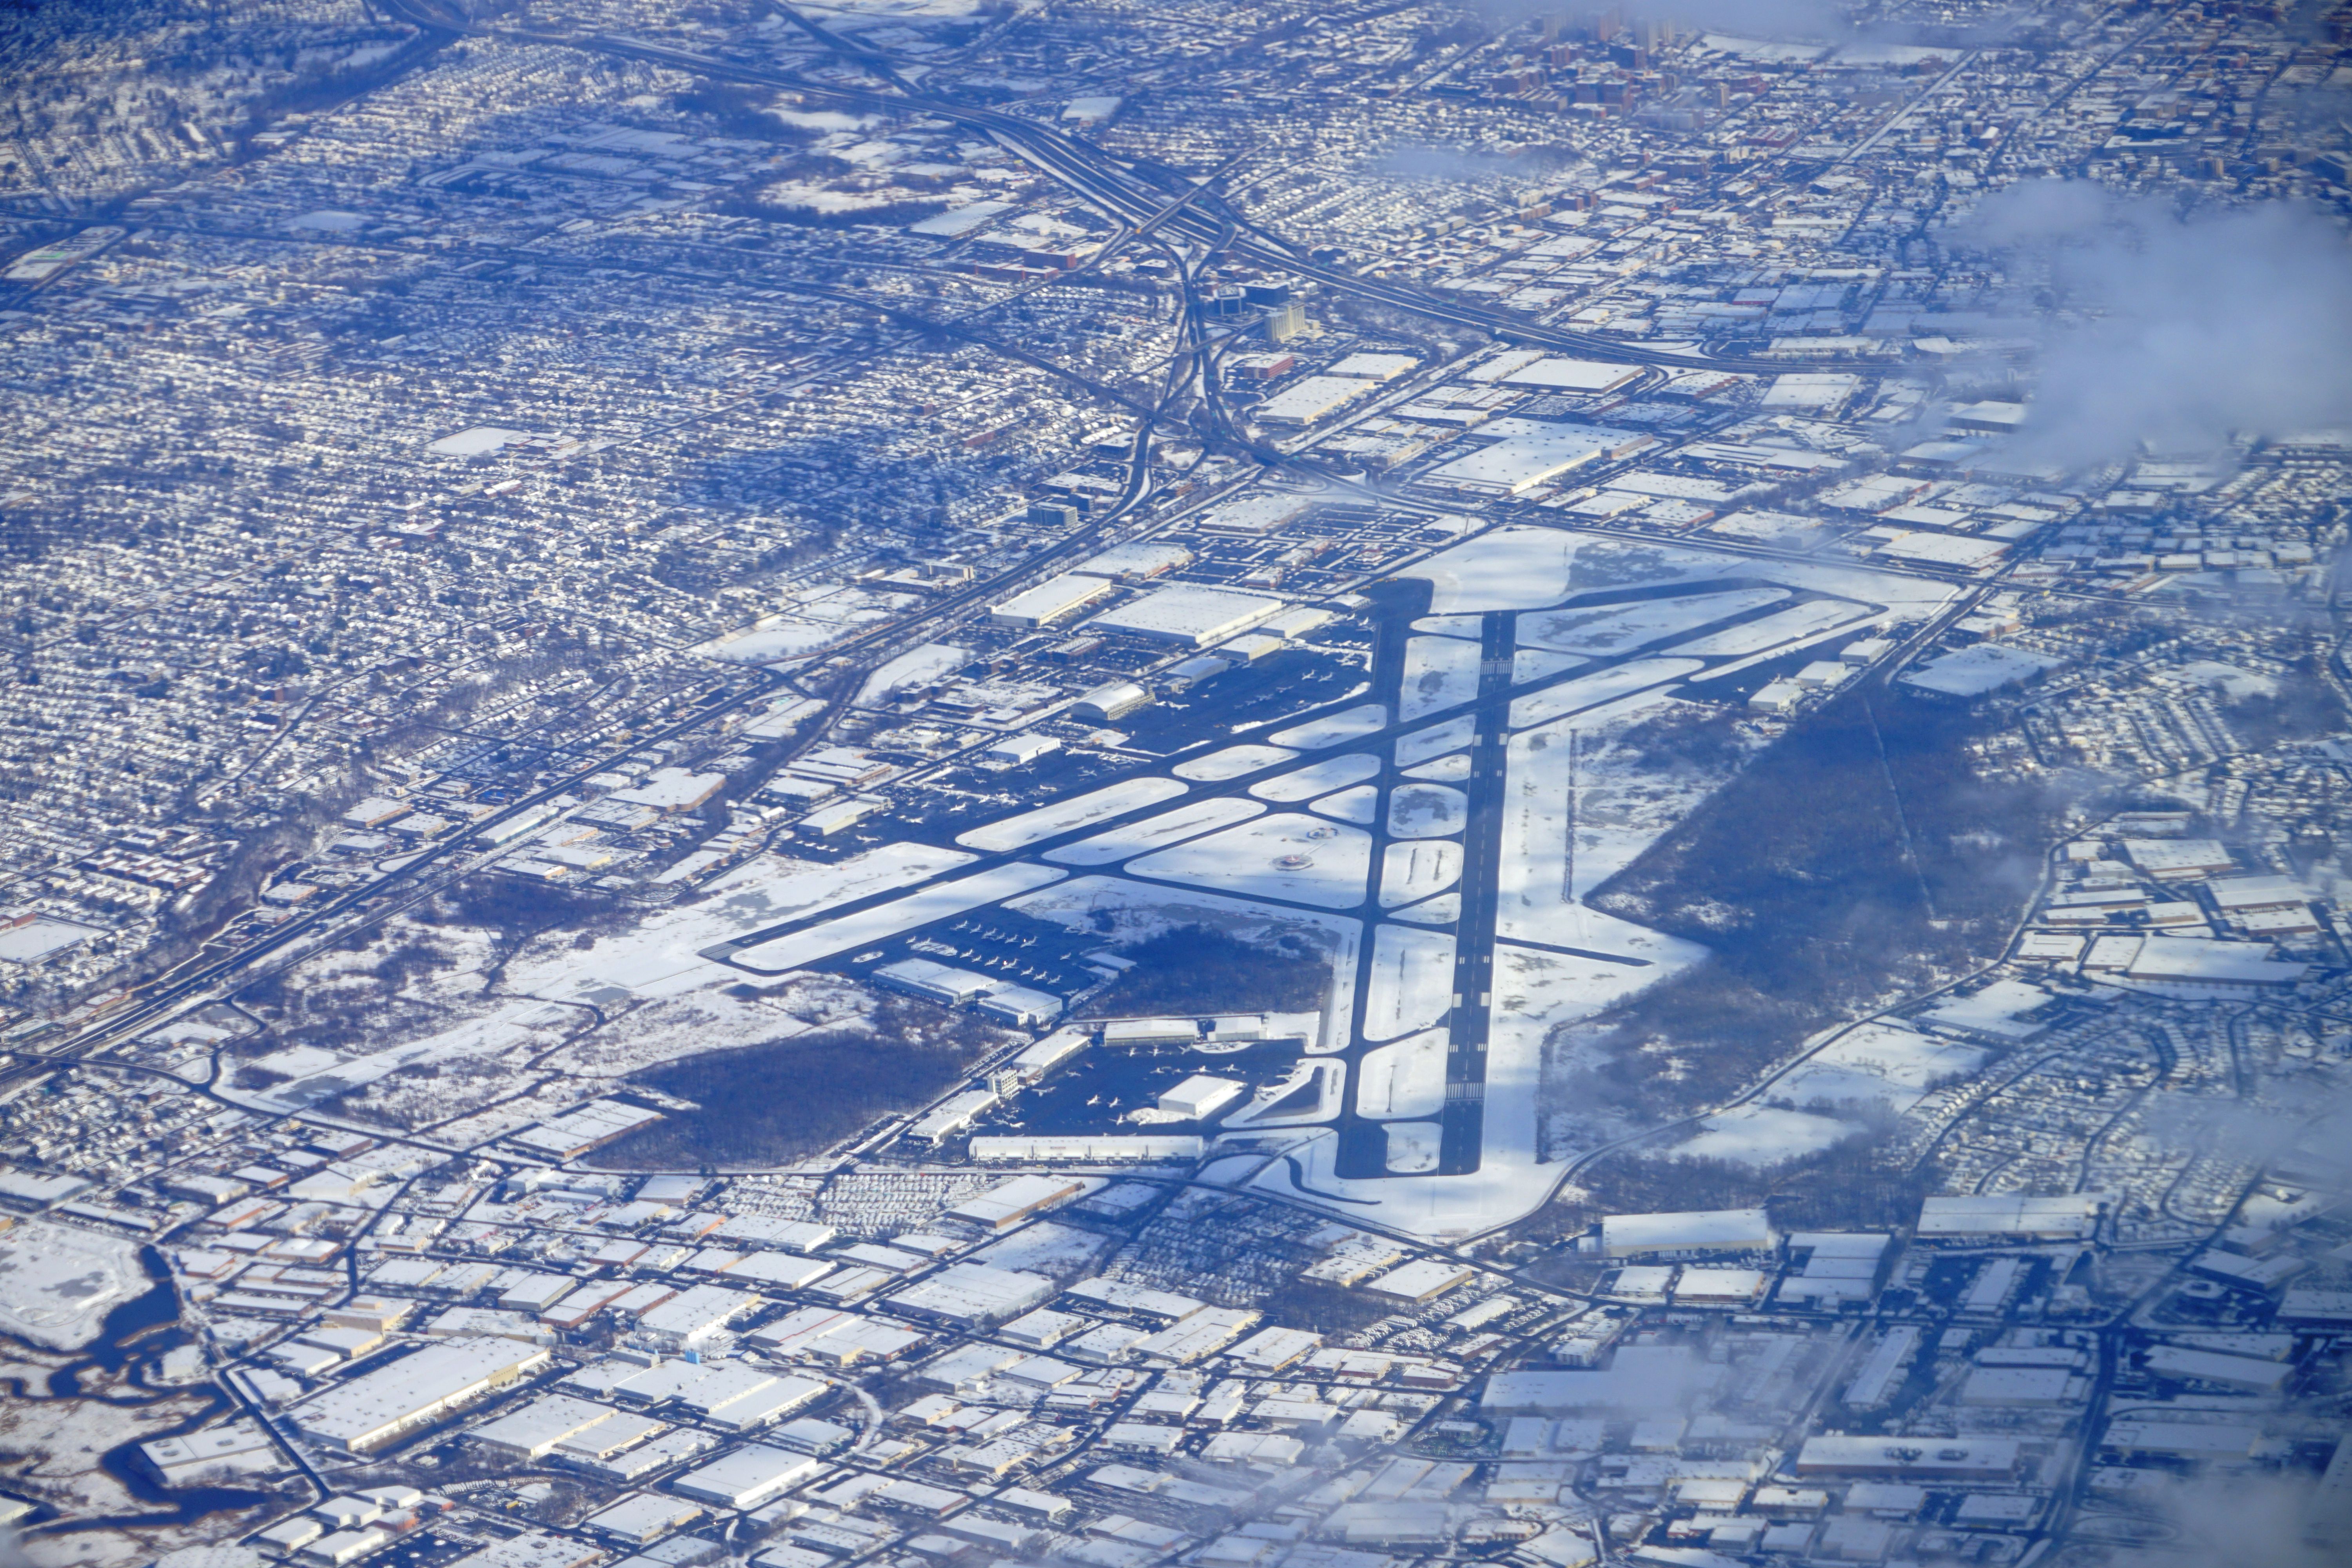  An Aerial view of Teterboro Airport.